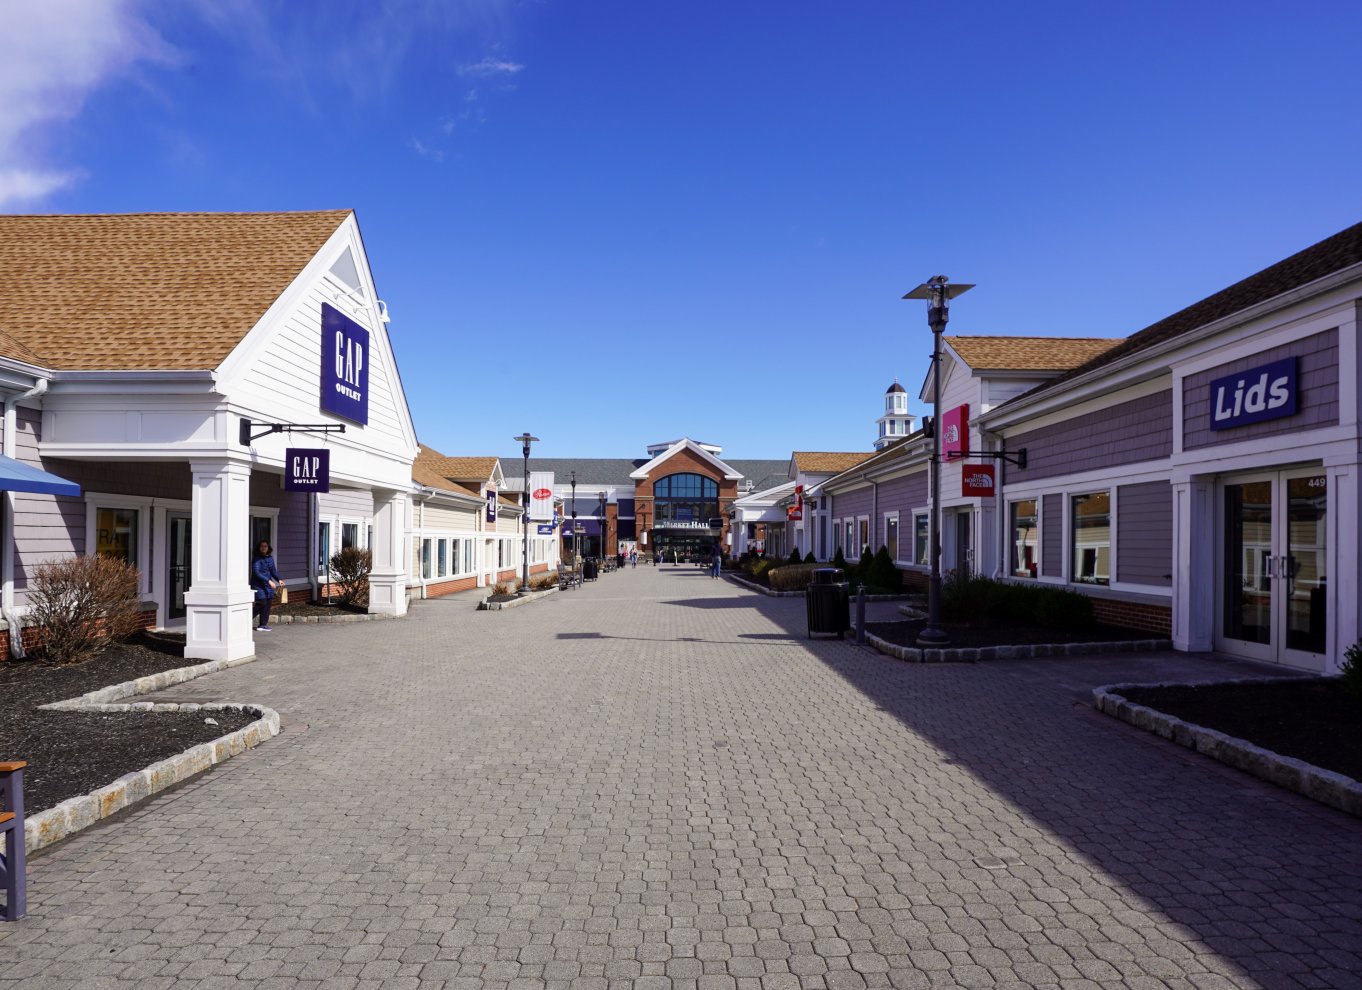 Fragrance Outlet at Woodbury Commons Premium Outlets